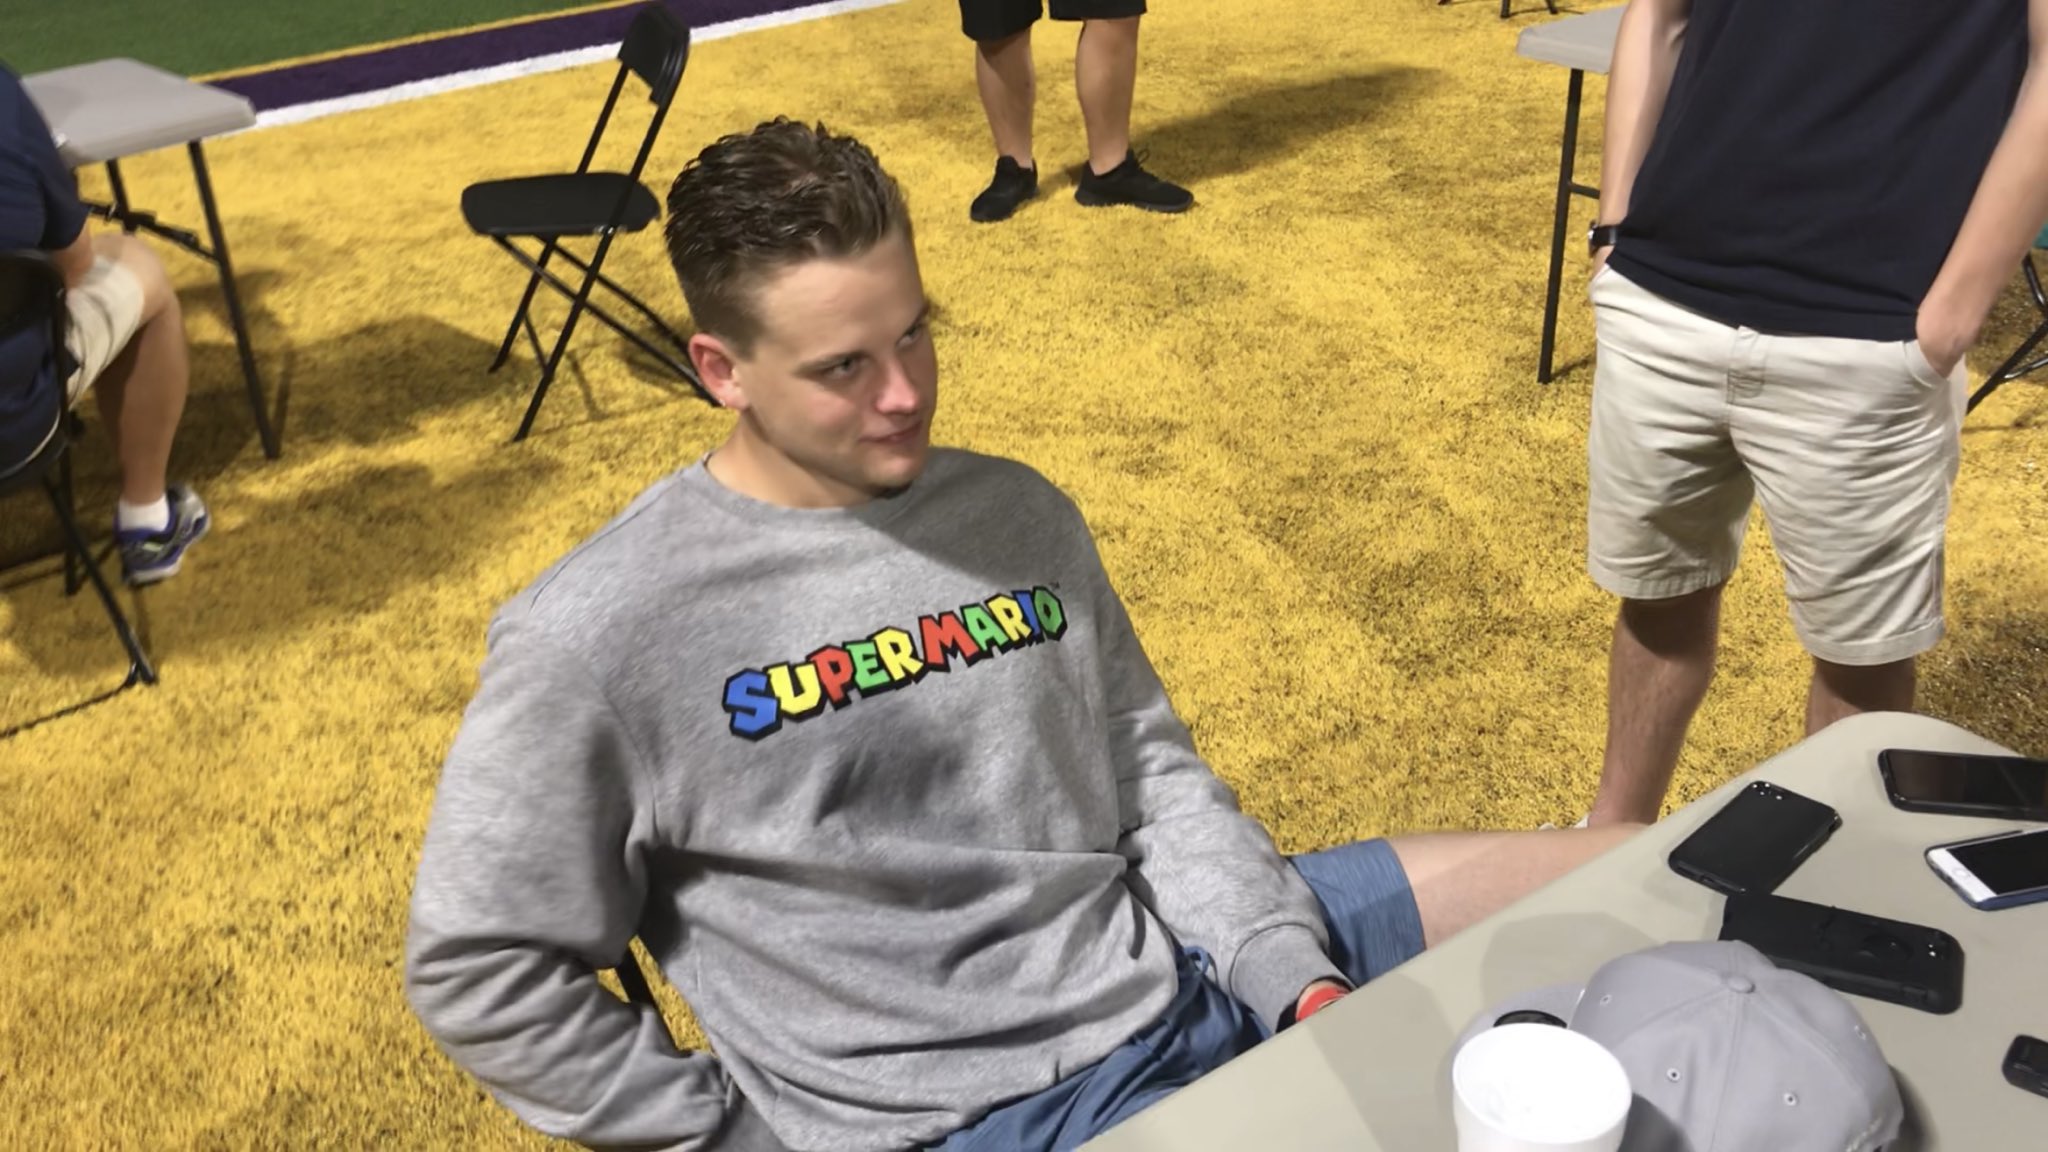 Glen West on X: 'Joe Burrow went with the Super Mario sweater in player  interviews today  / X